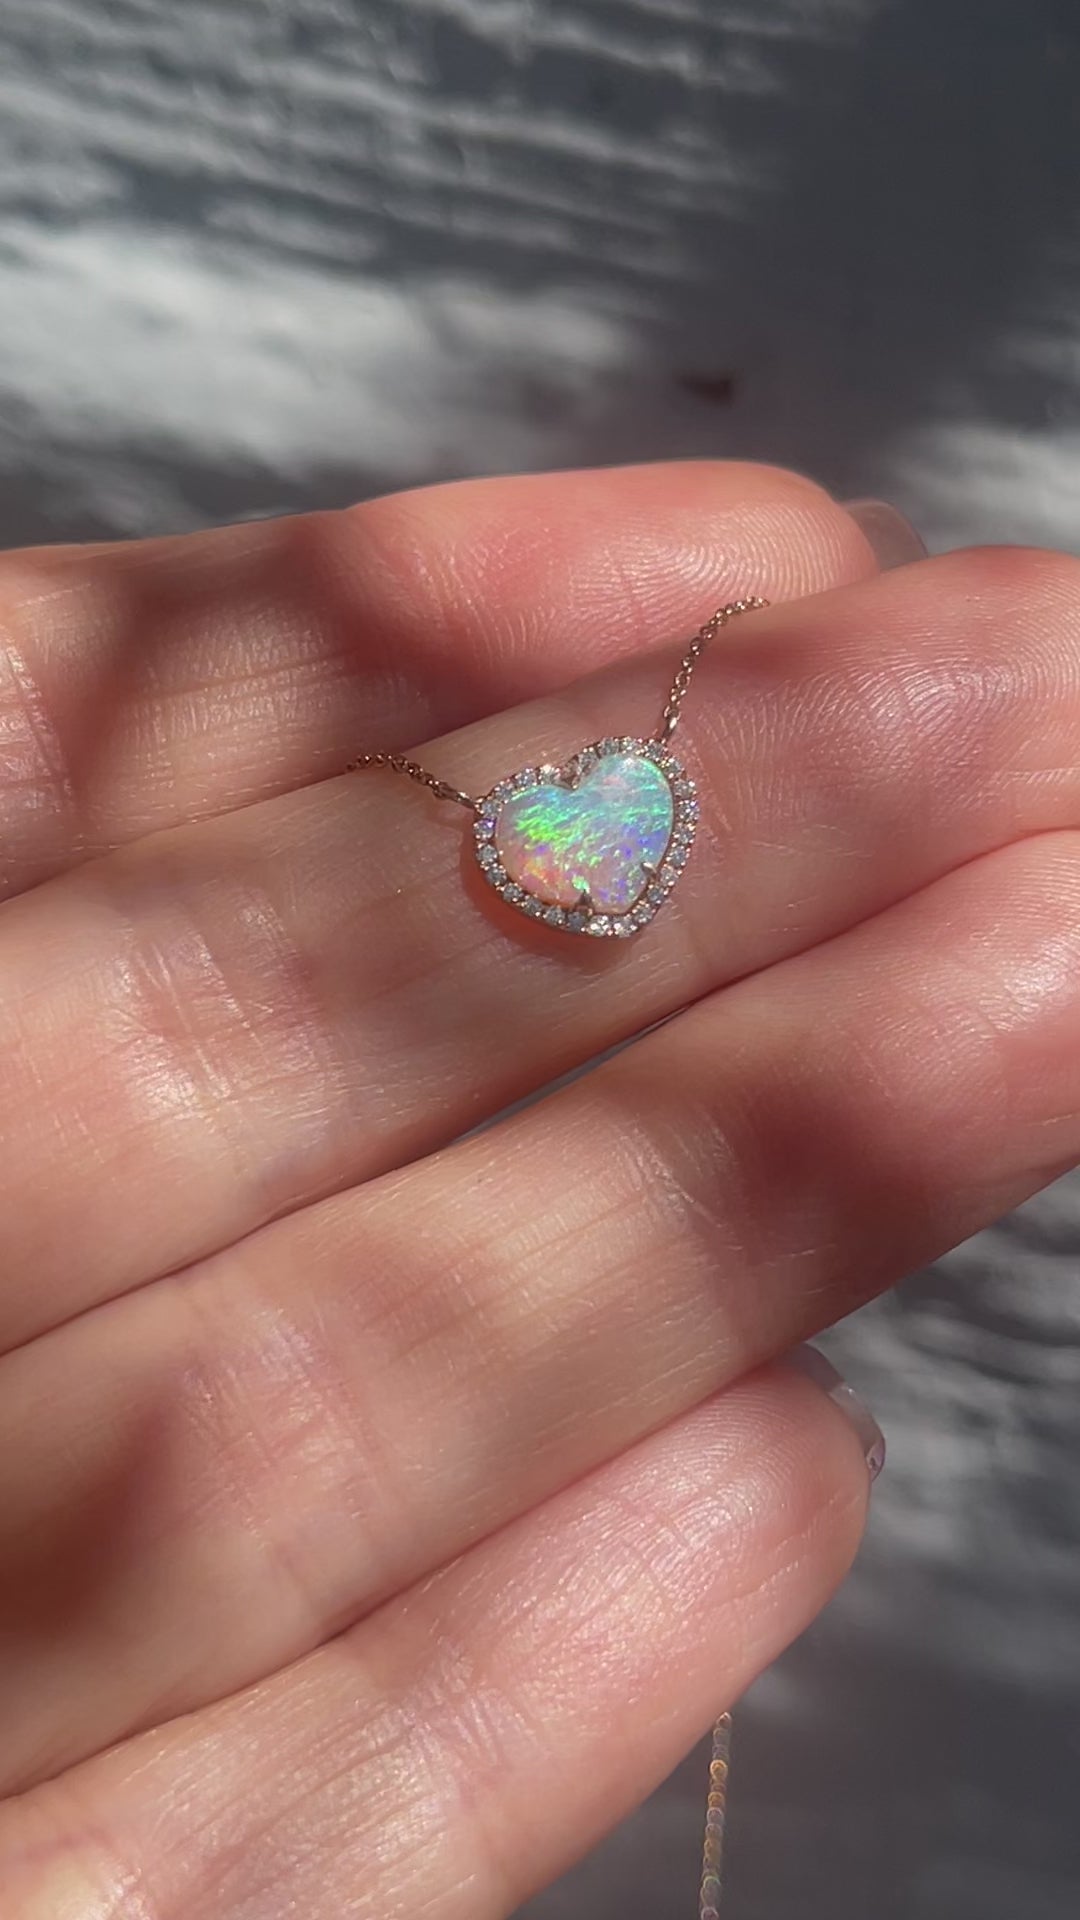 Video of an Opal Heart Necklace by NIXIN Jewelry moving in the sunlight. The pink and blue Crystal Opal flashes rainbow colors as the diamond halo sparkles around it.